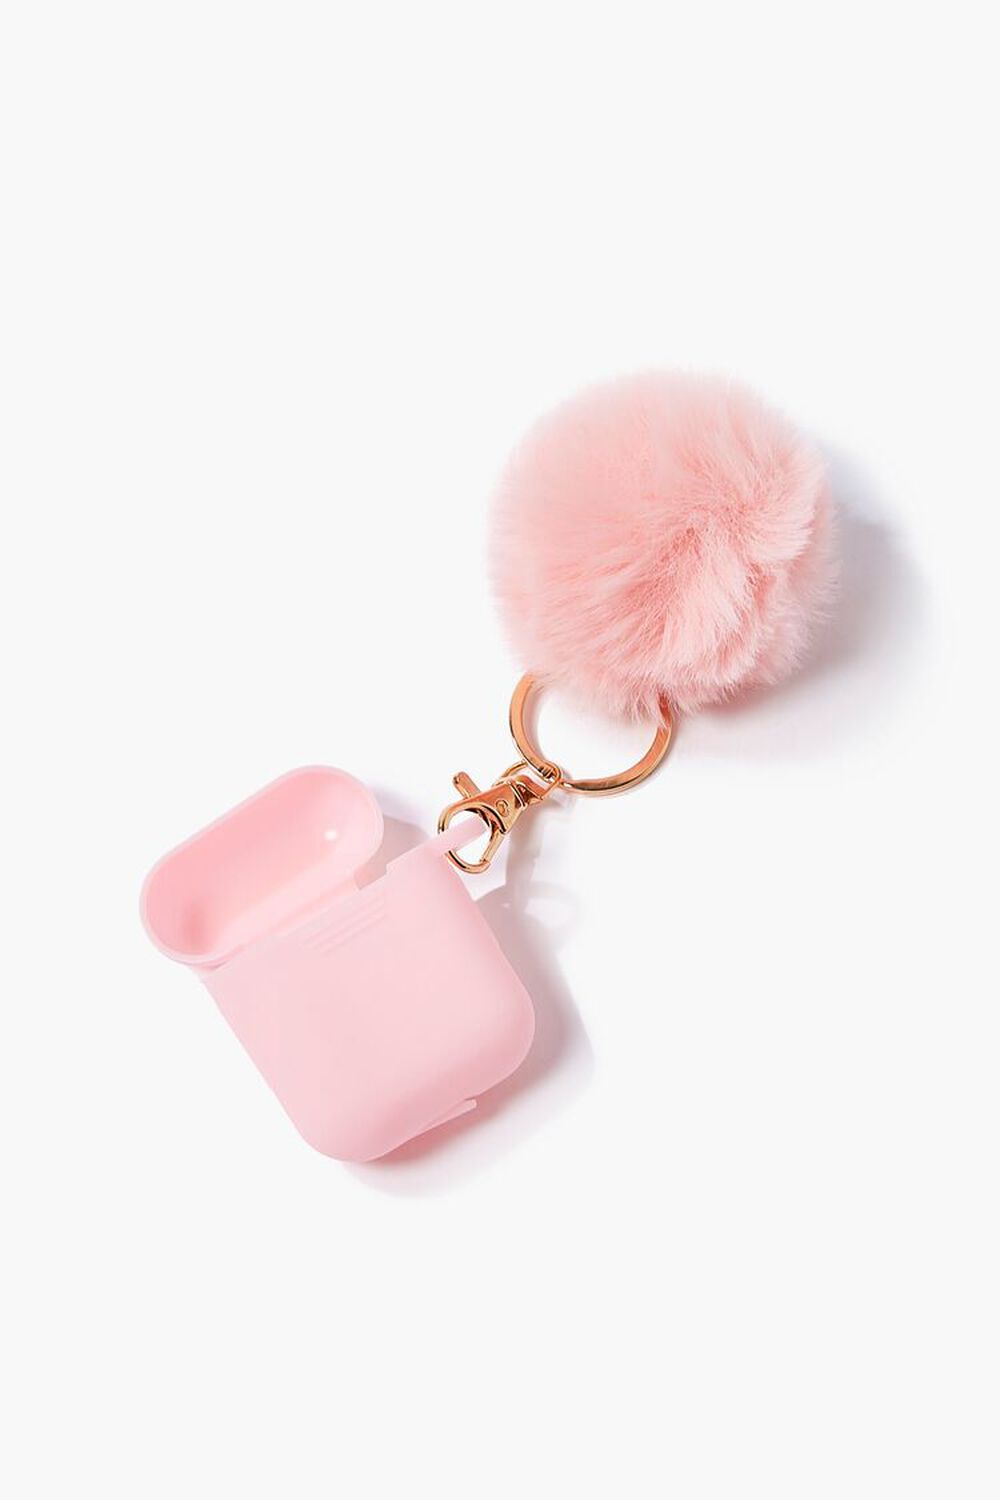 PINK Pom Pom Earbuds Case for AirPods, image 1